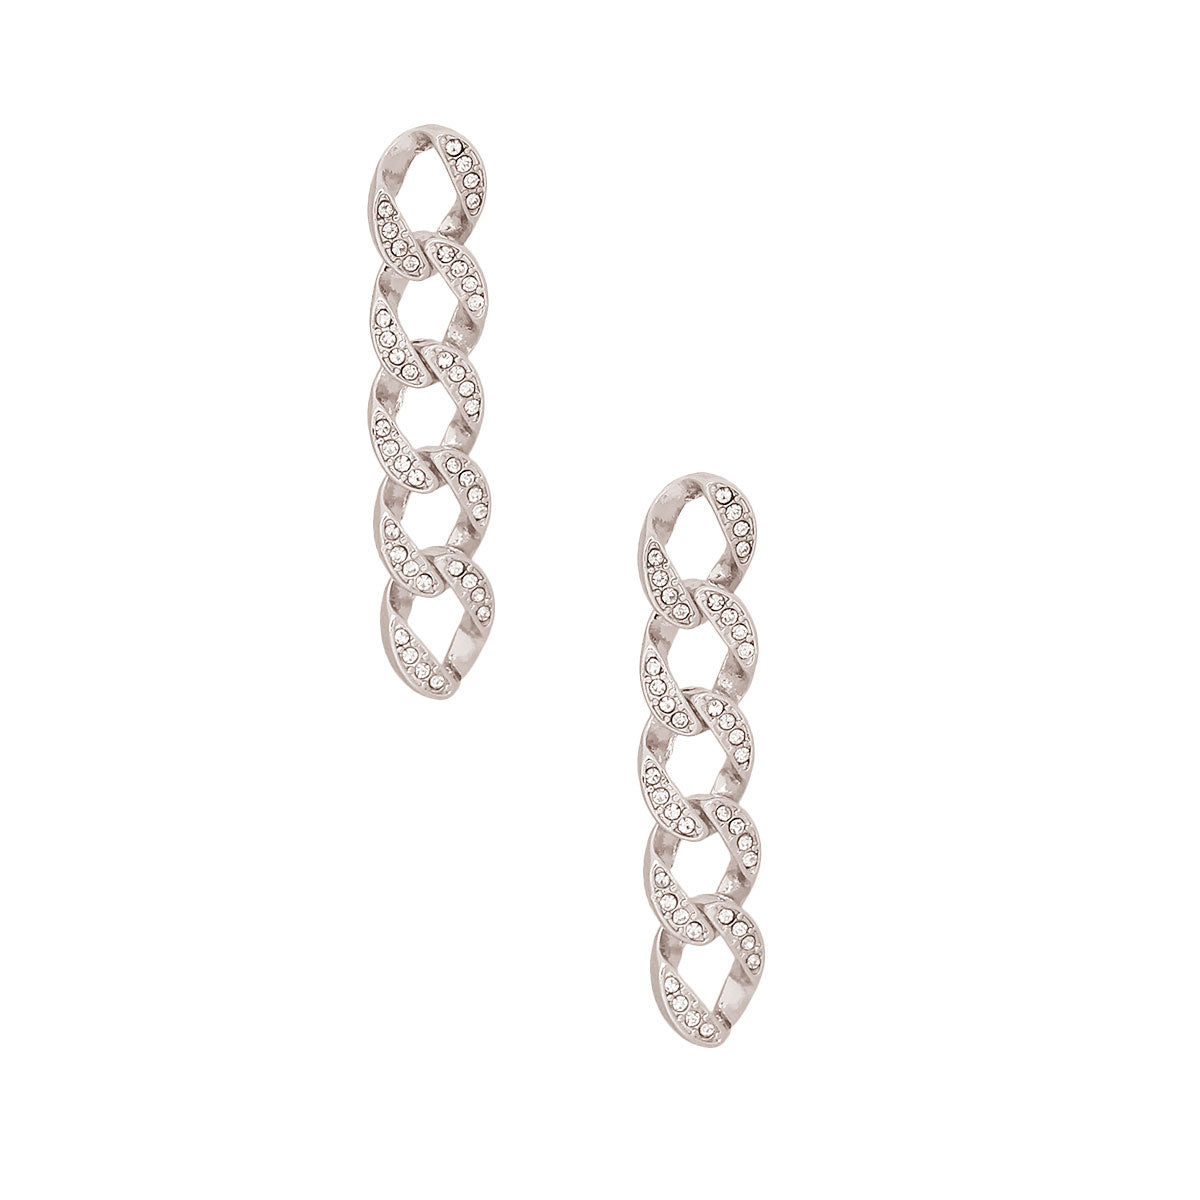 Silver Pave Chain Link Earrings